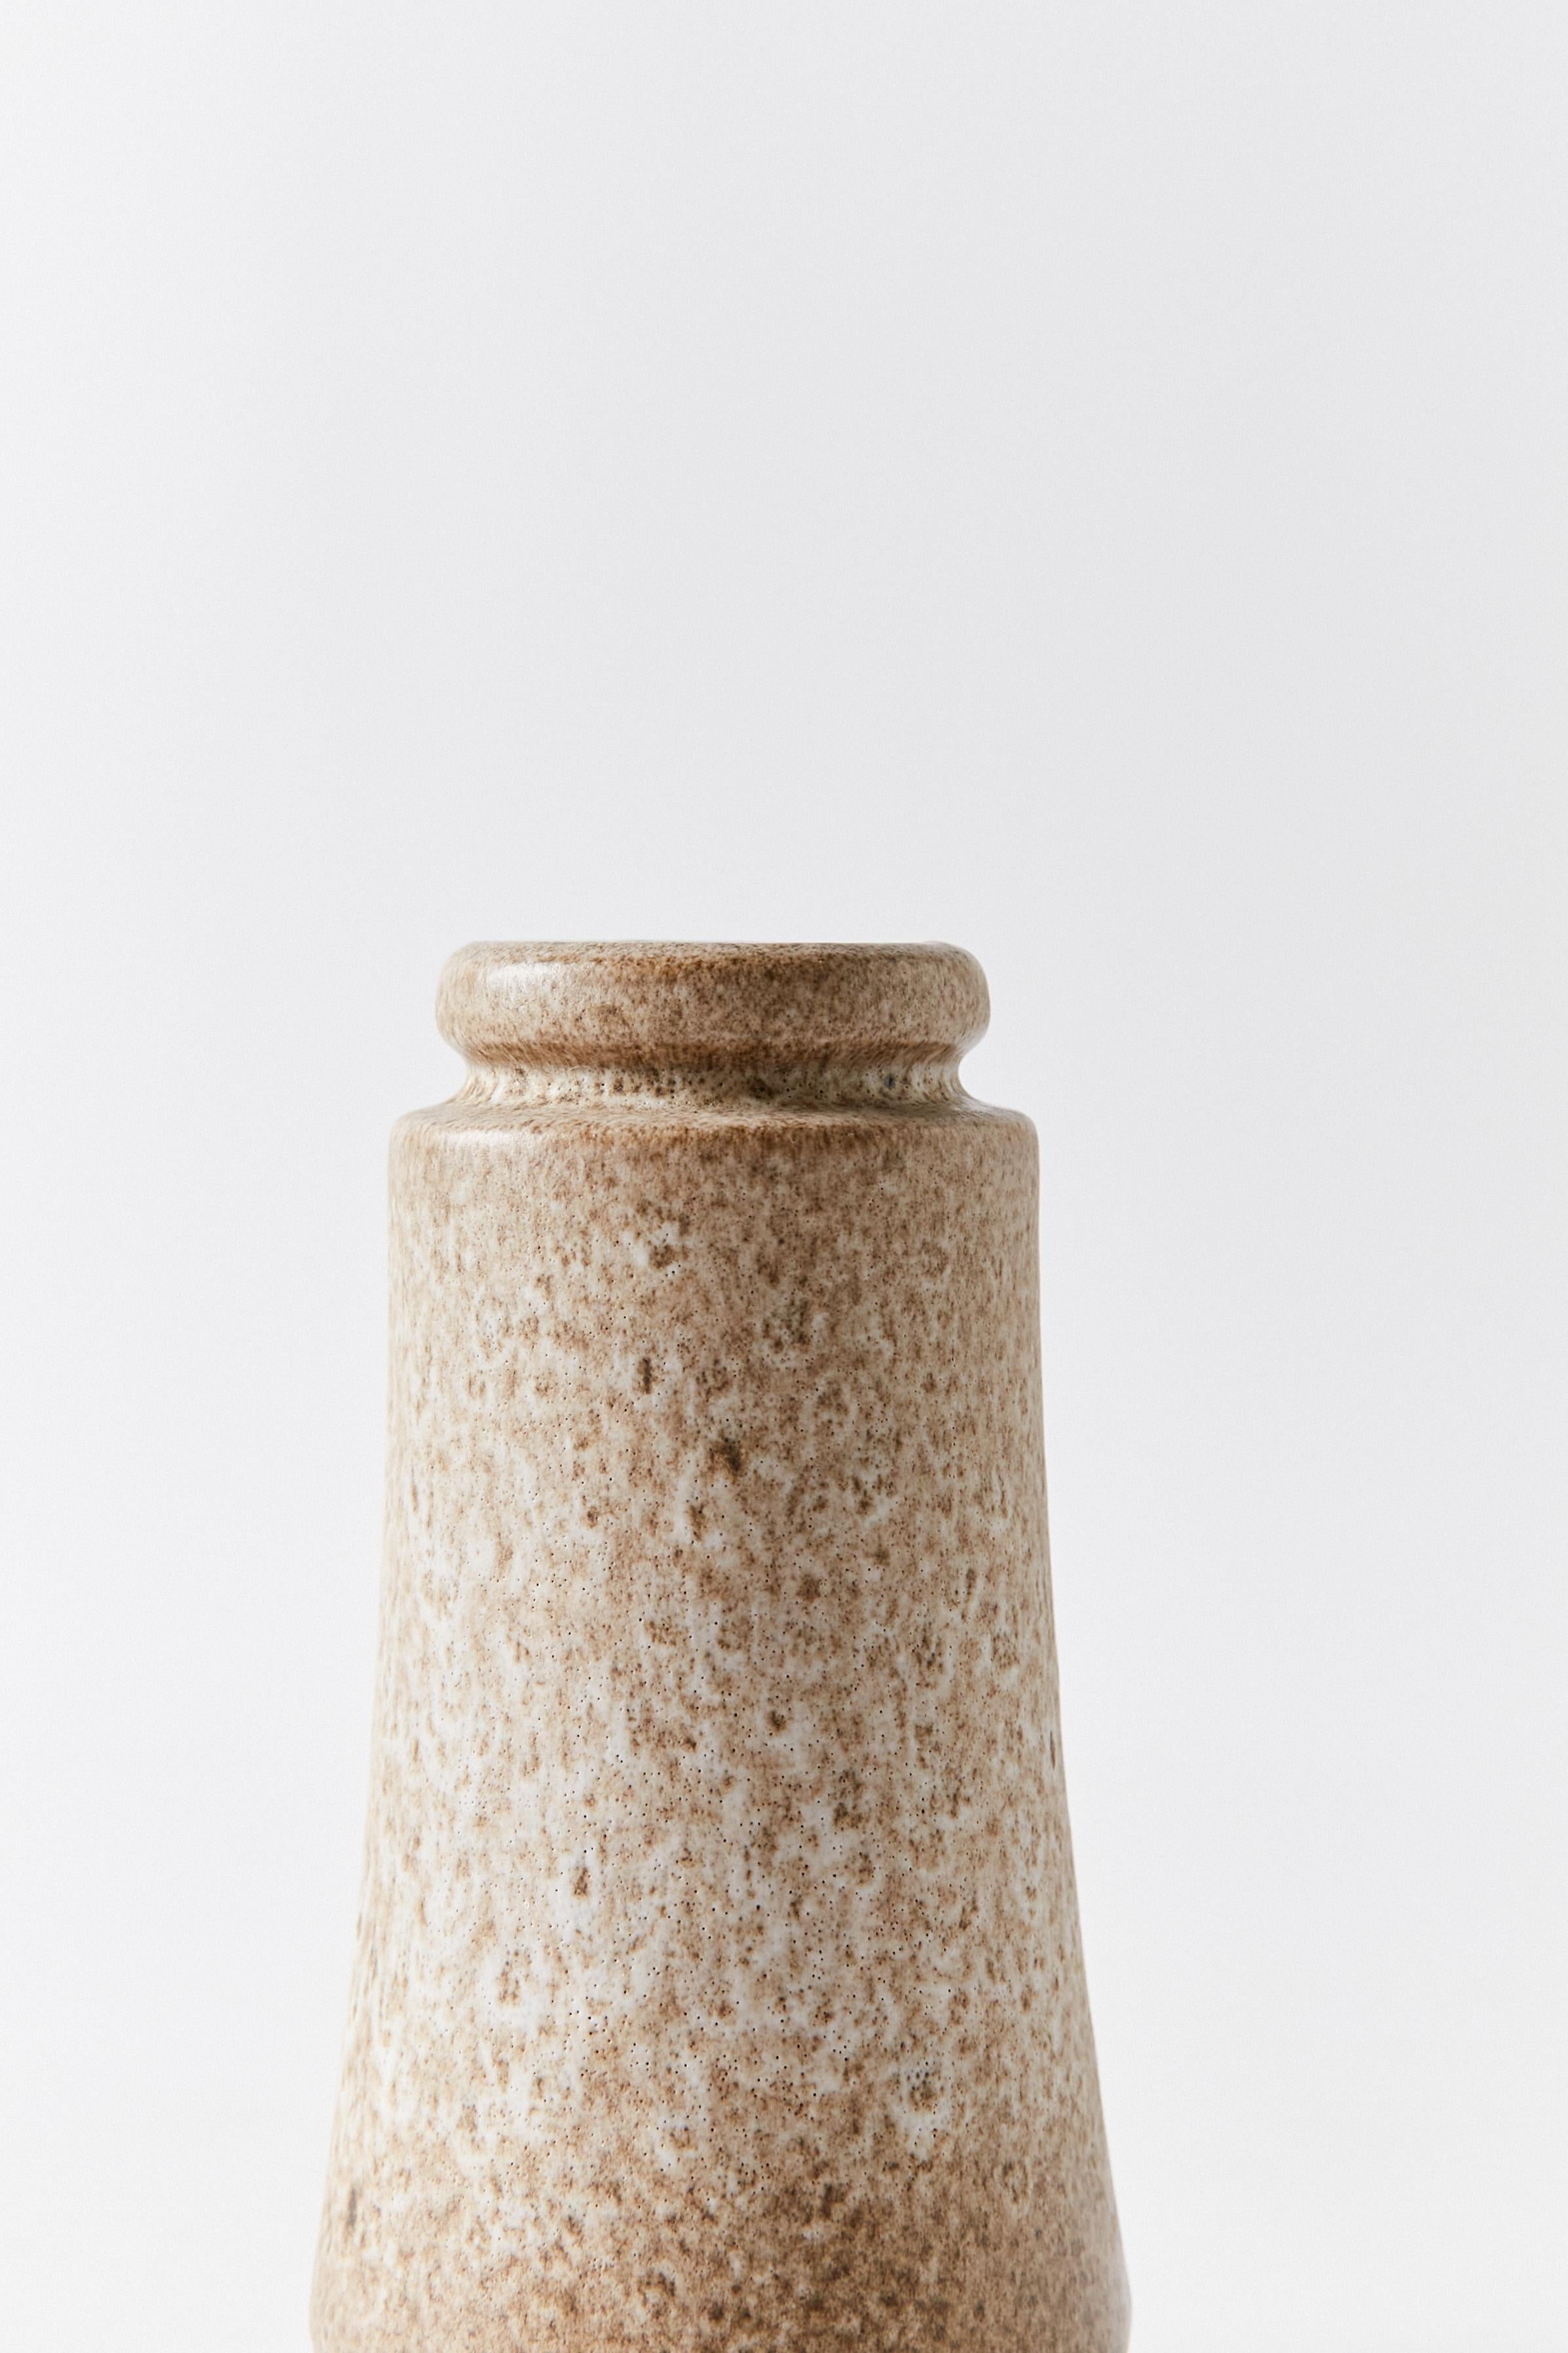 Glazed Fat Lava Vase with Textured Sand Tones, West Germany, 1960s For Sale